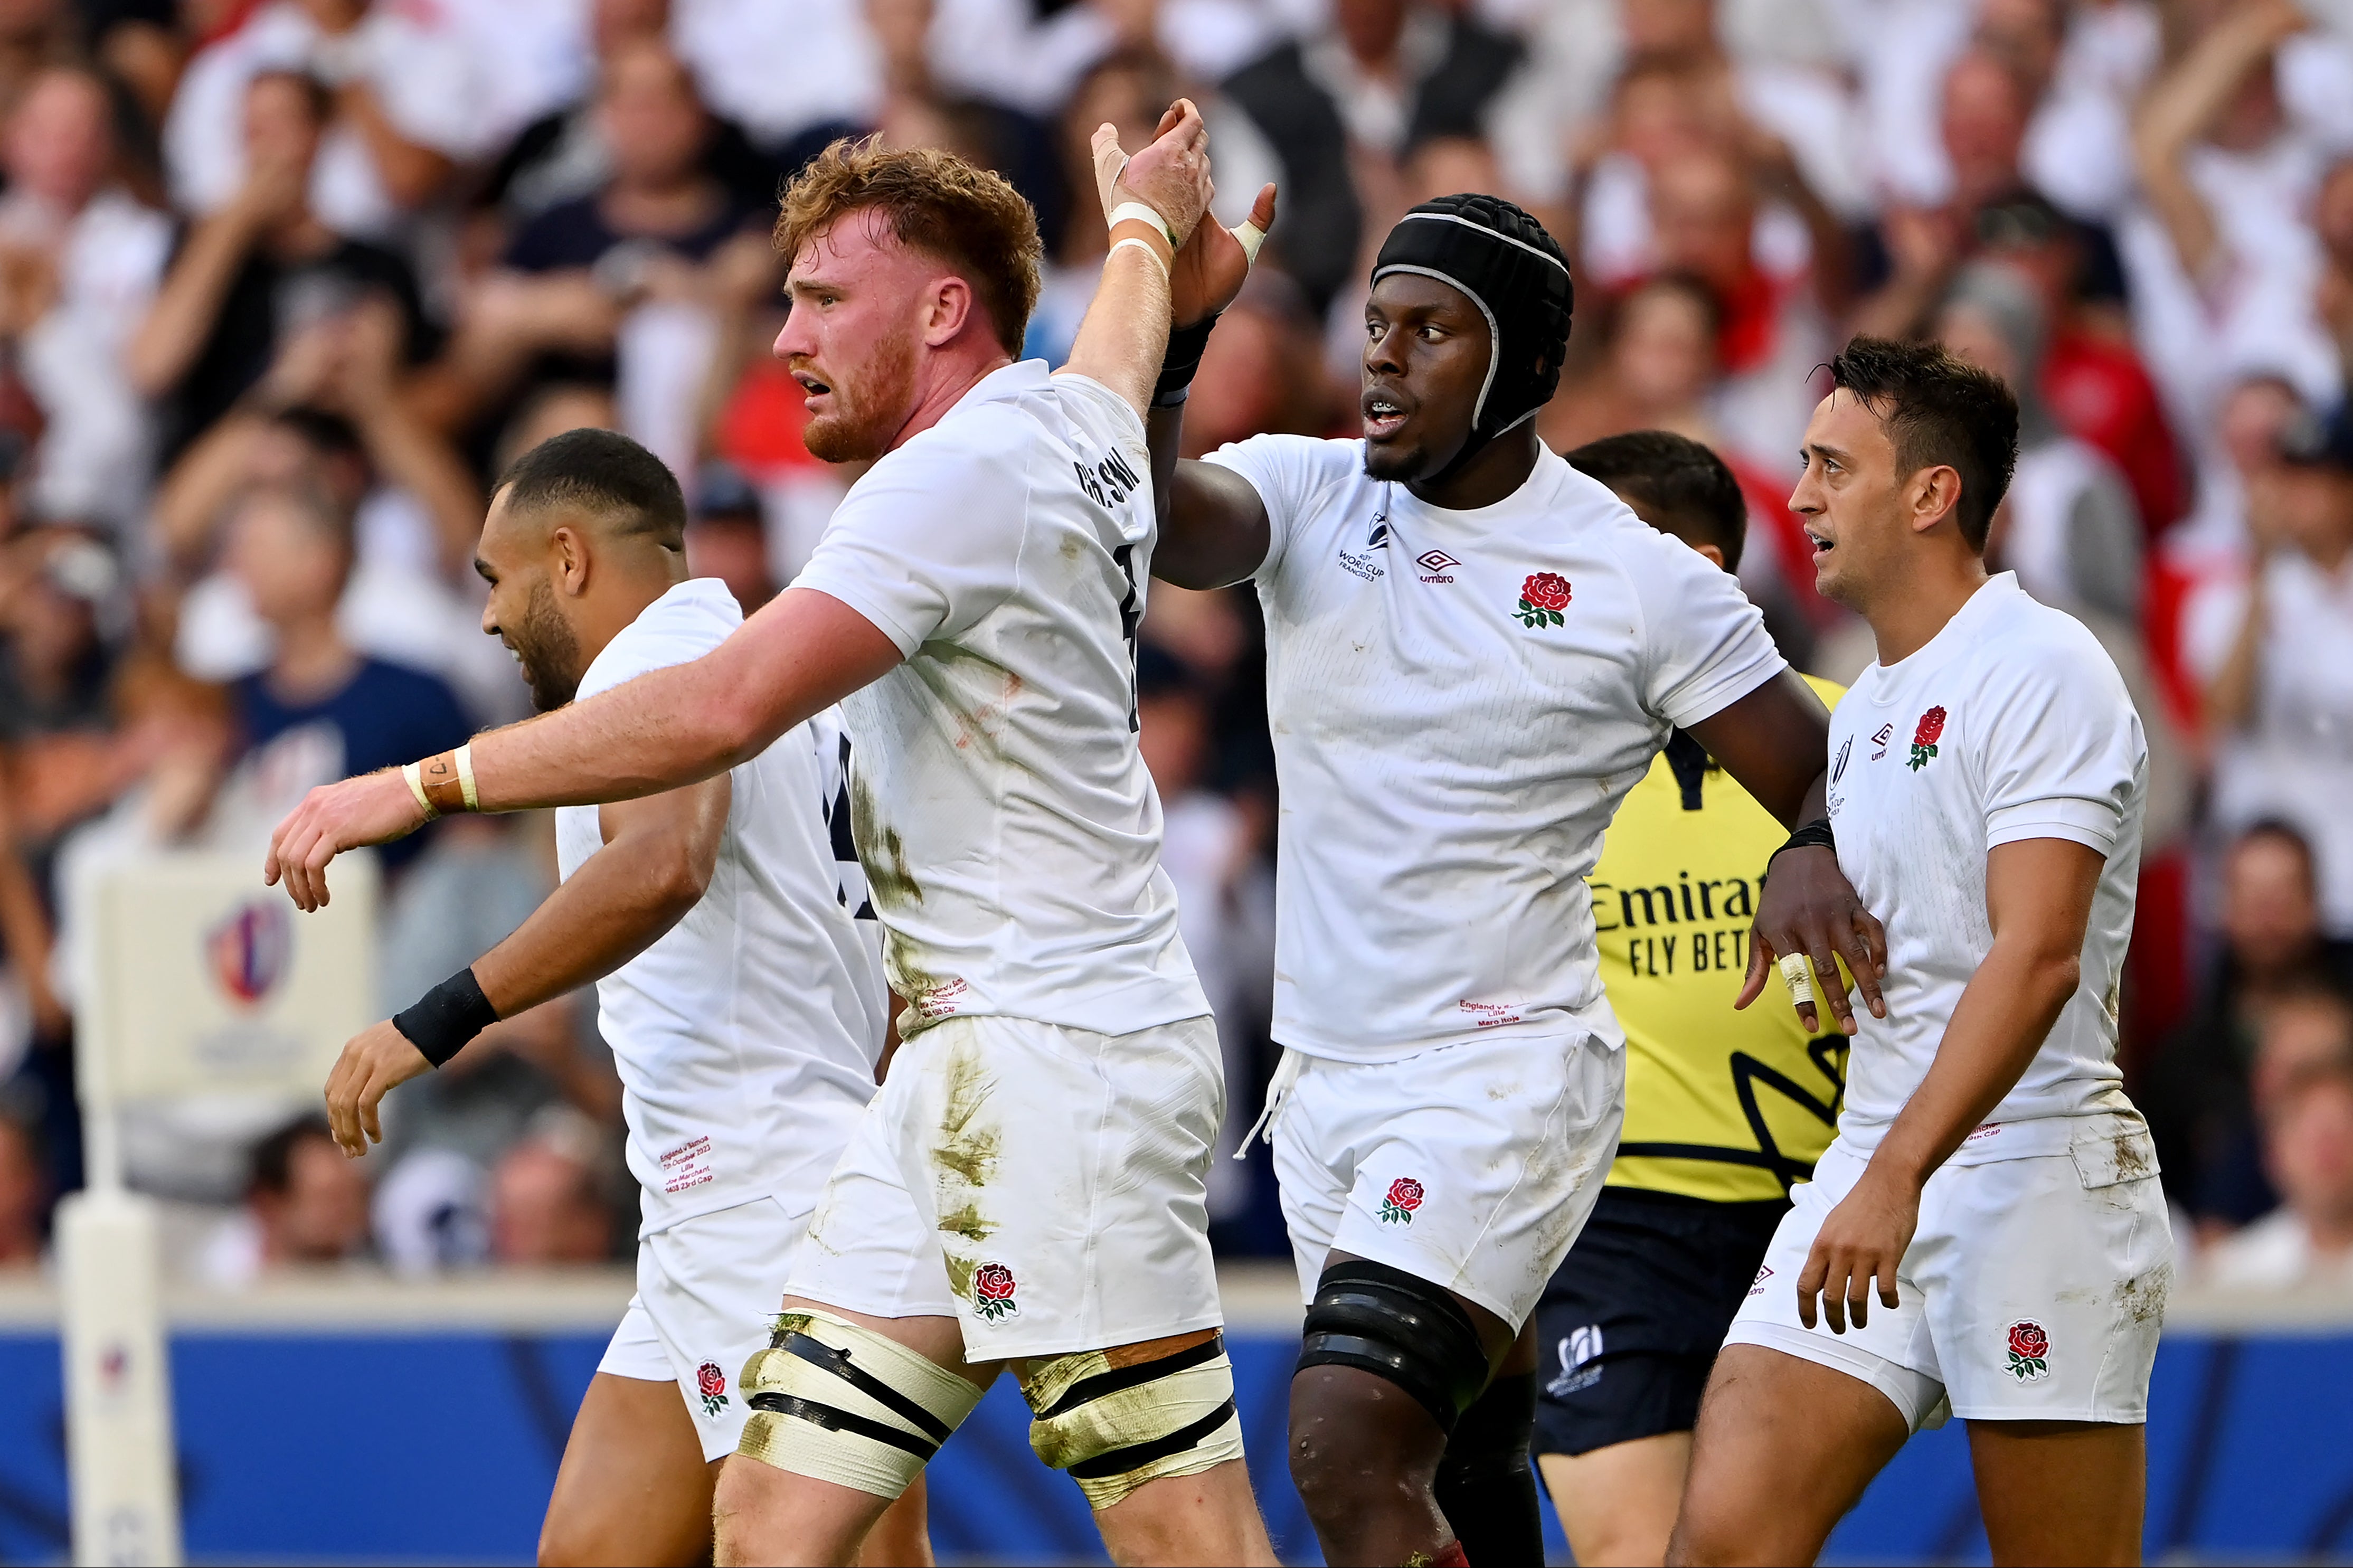 Fiji stand in their way, but England have an excellent chance of making the World Cup quarter-finals